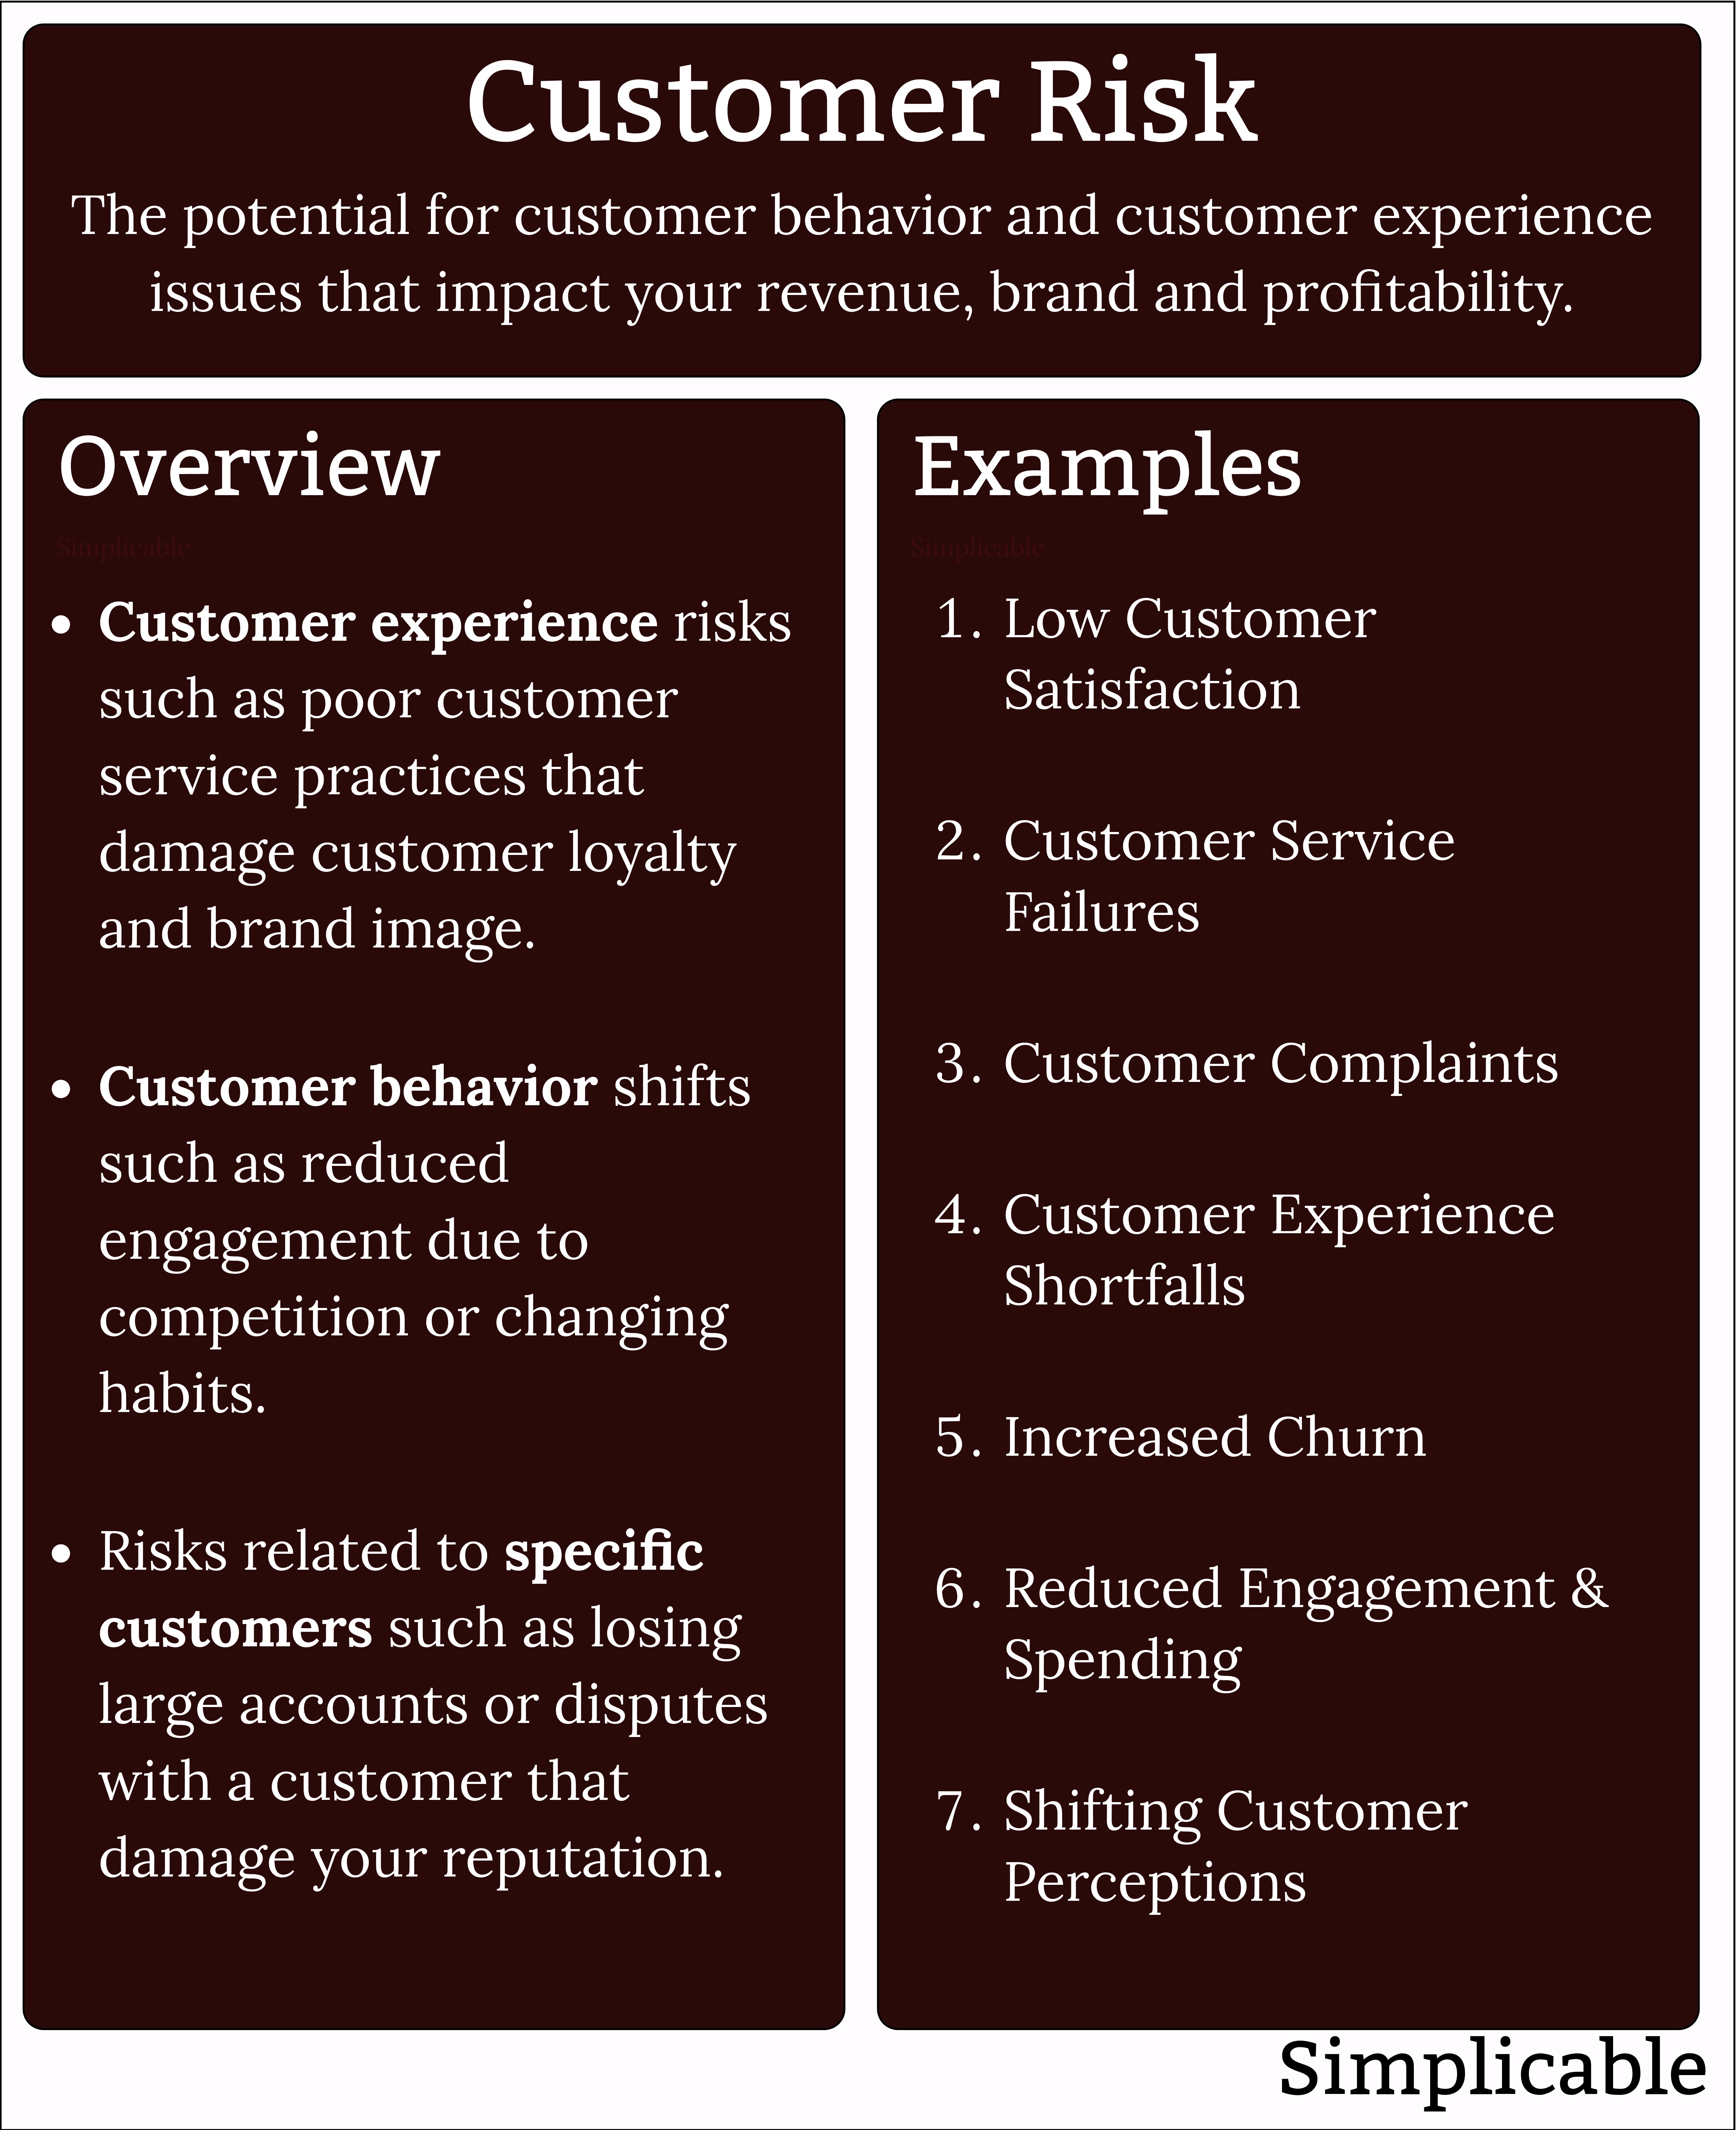 customer risk summary and examples